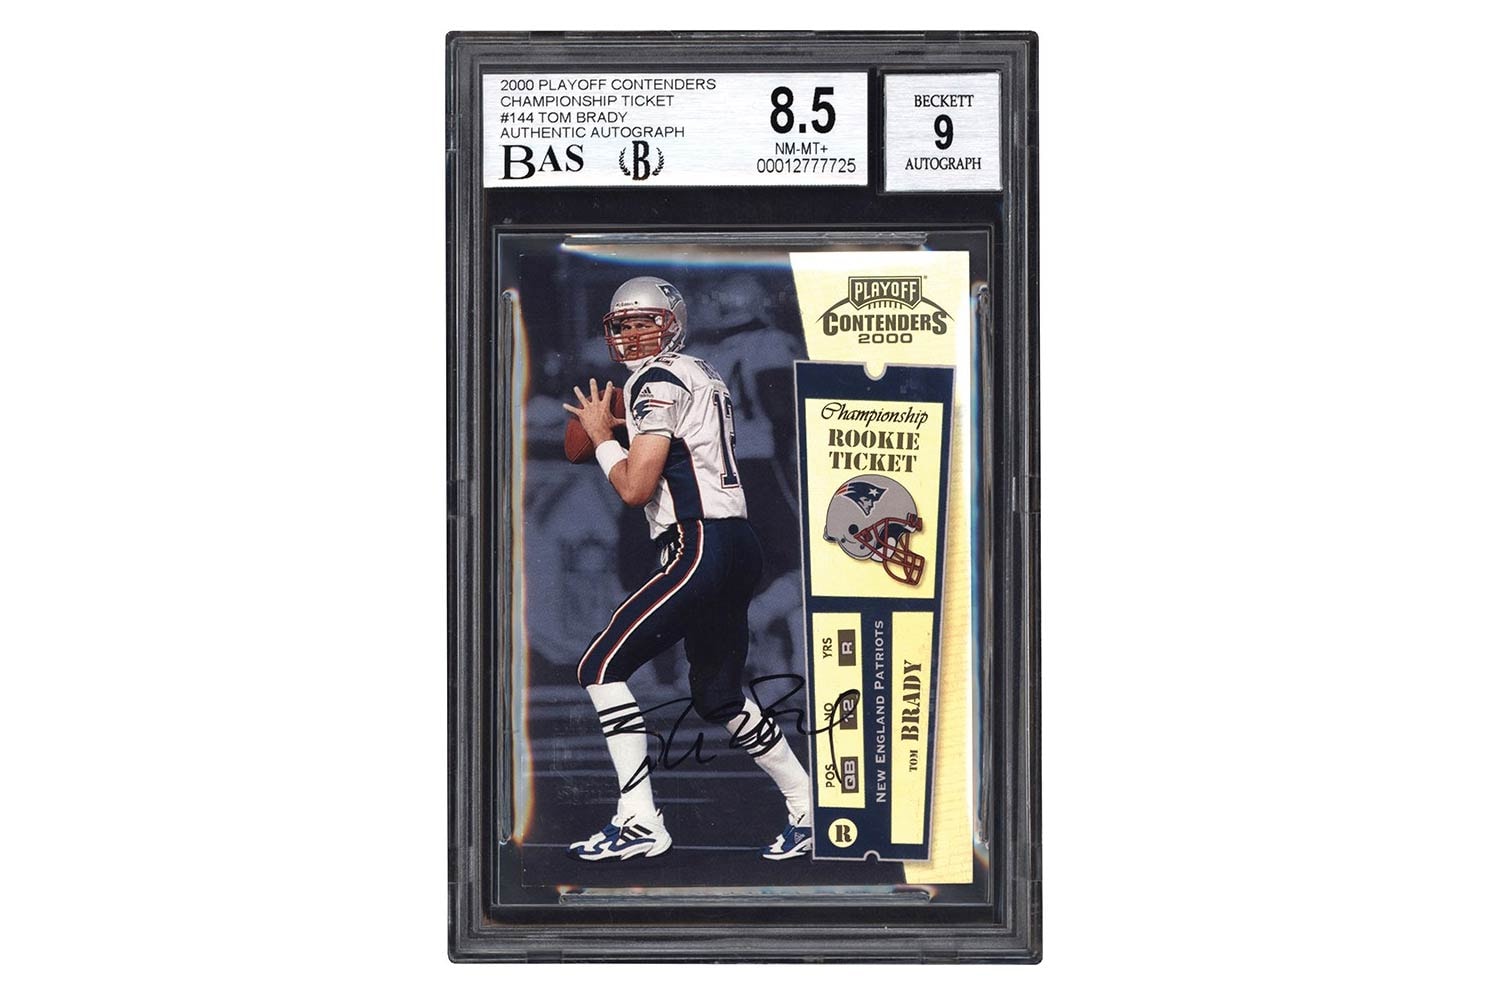 Lelands Tom Brady Rookie Card auto 2000 Playoff Contenders Championship Ticket BGS 8.5 auction sports cards collectibles 